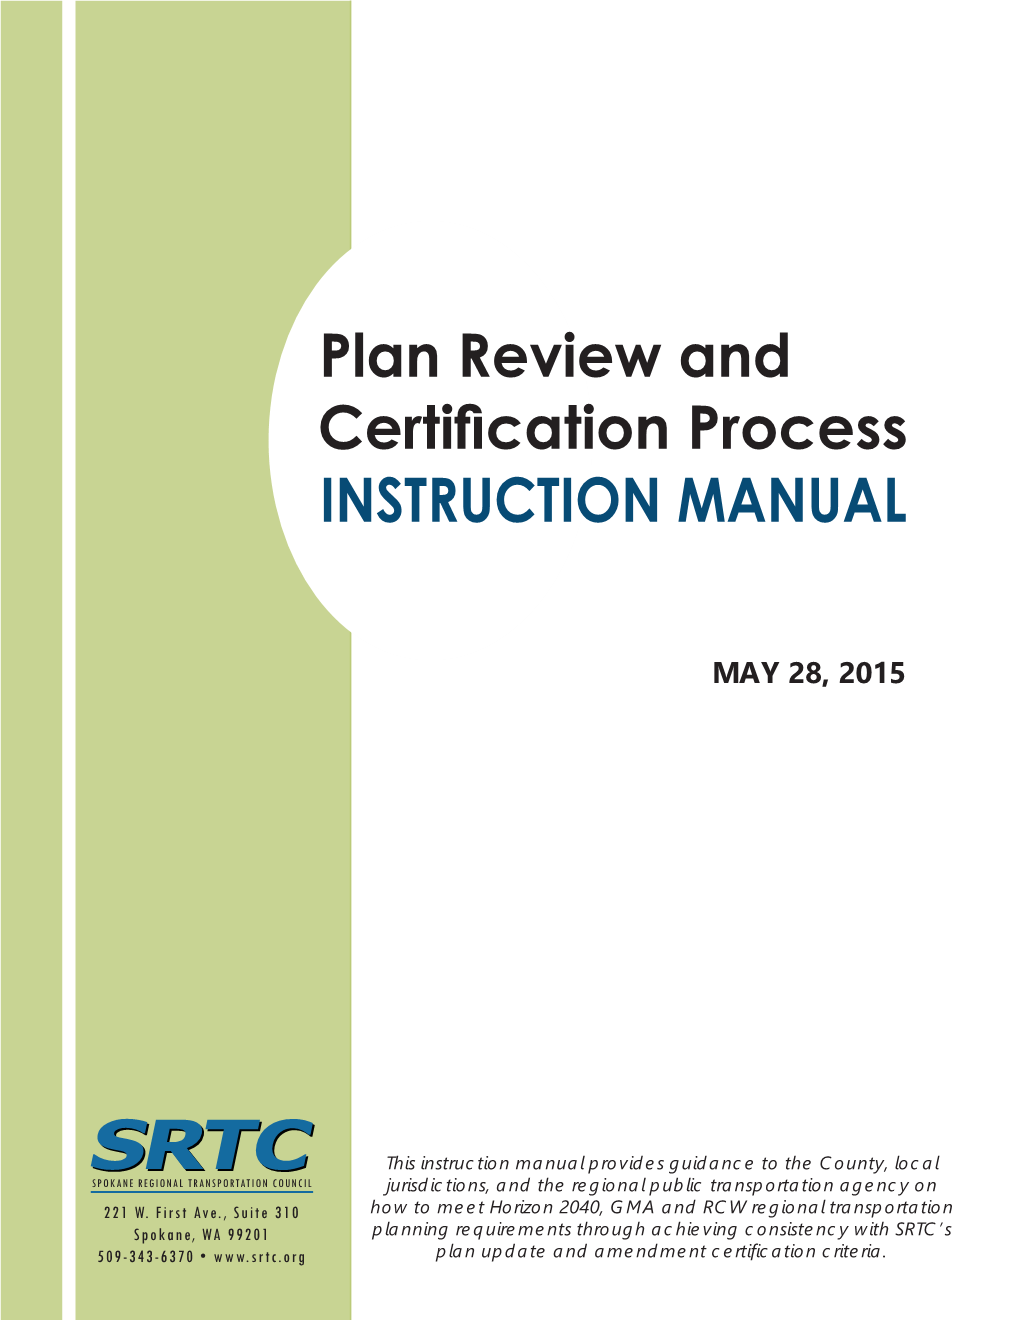 SRTC Review and Certification Process